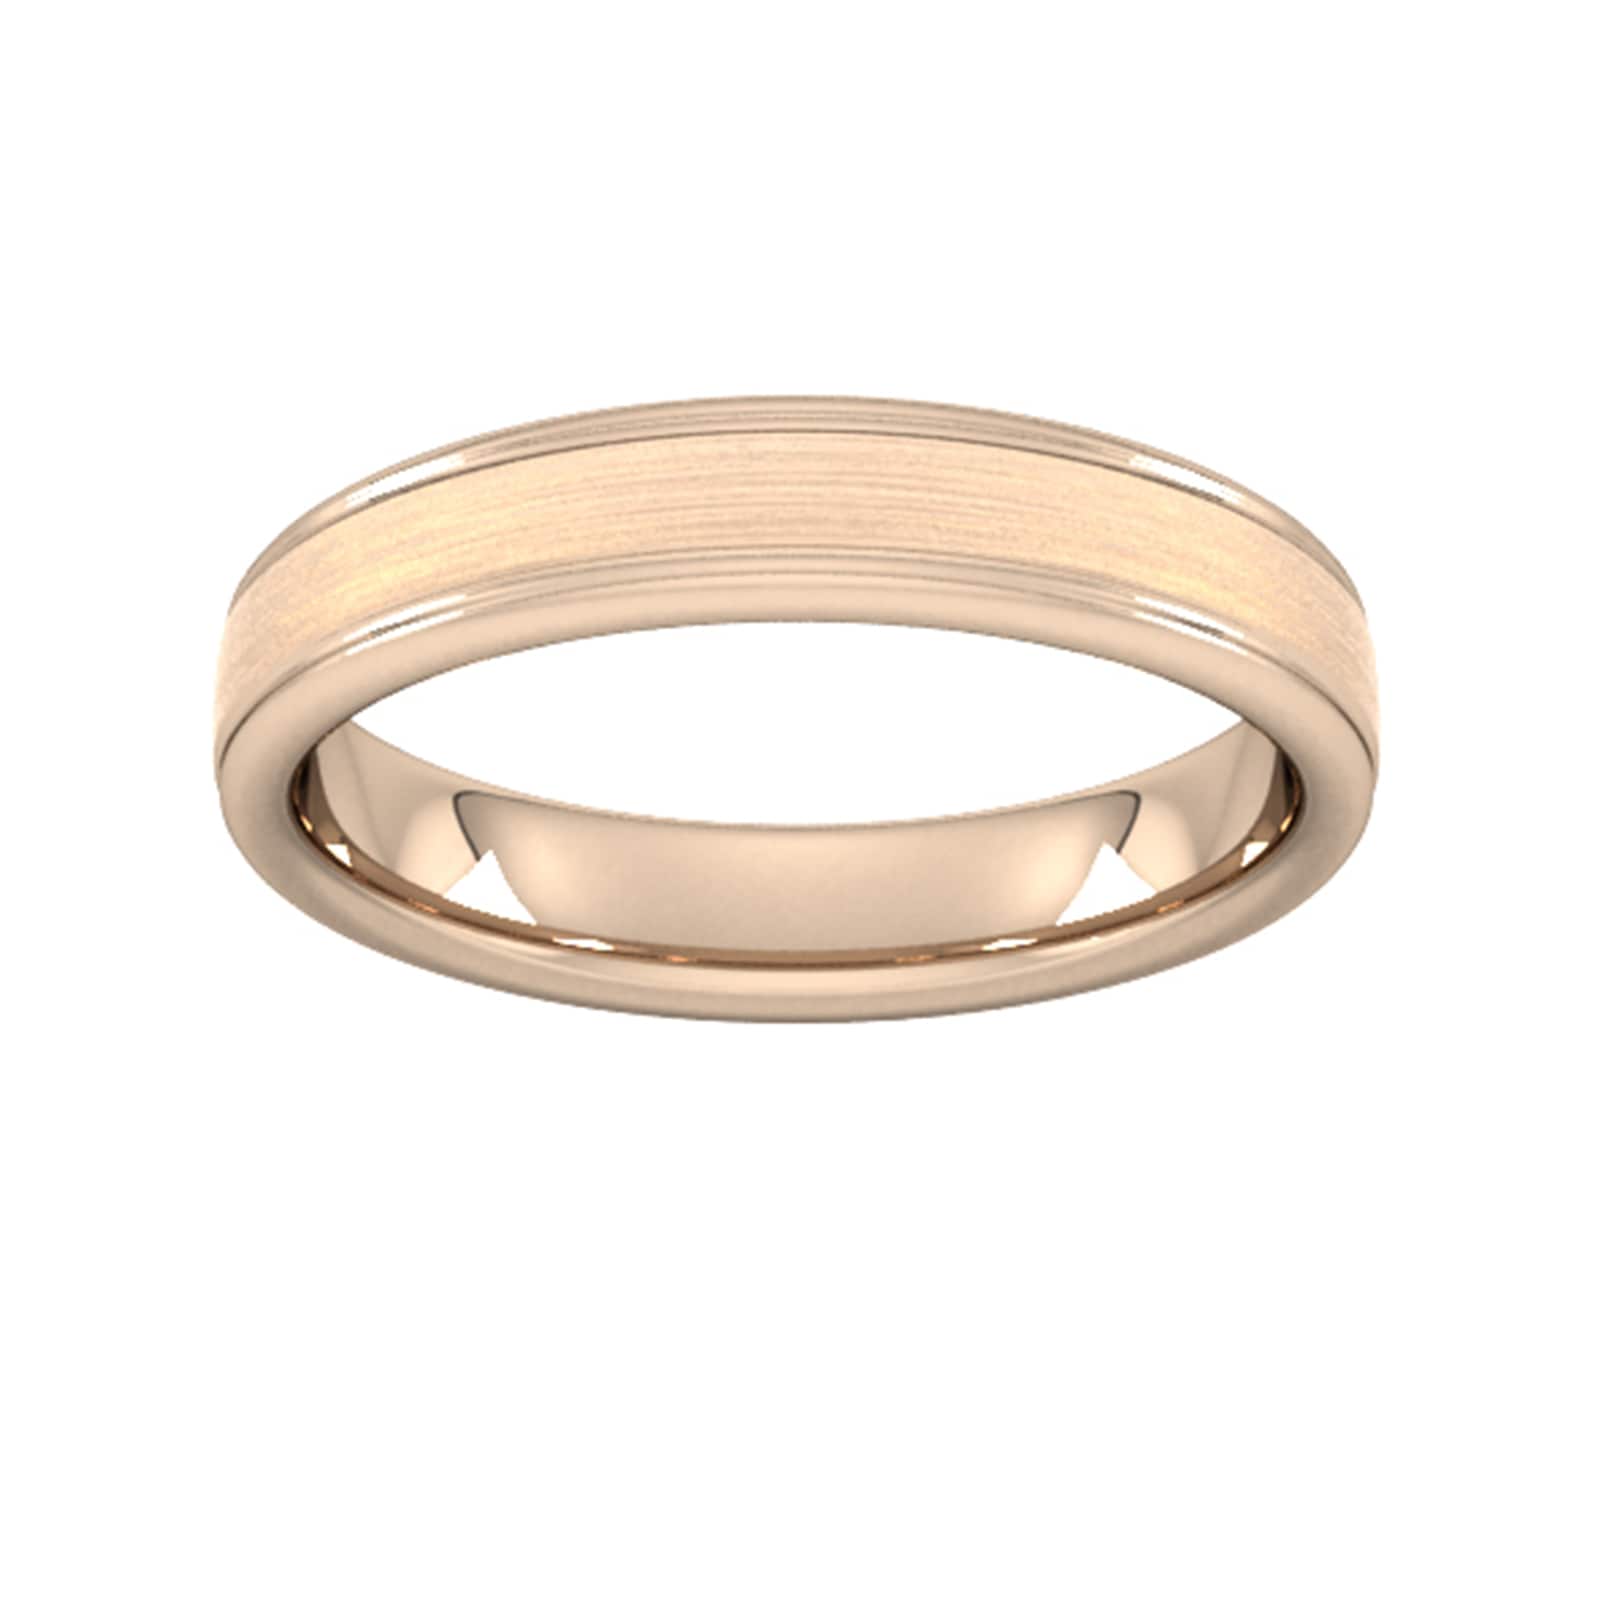 4mm D Shape Standard Matt Centre With Grooves Wedding Ring In 9 Carat Rose Gold - Ring Size W